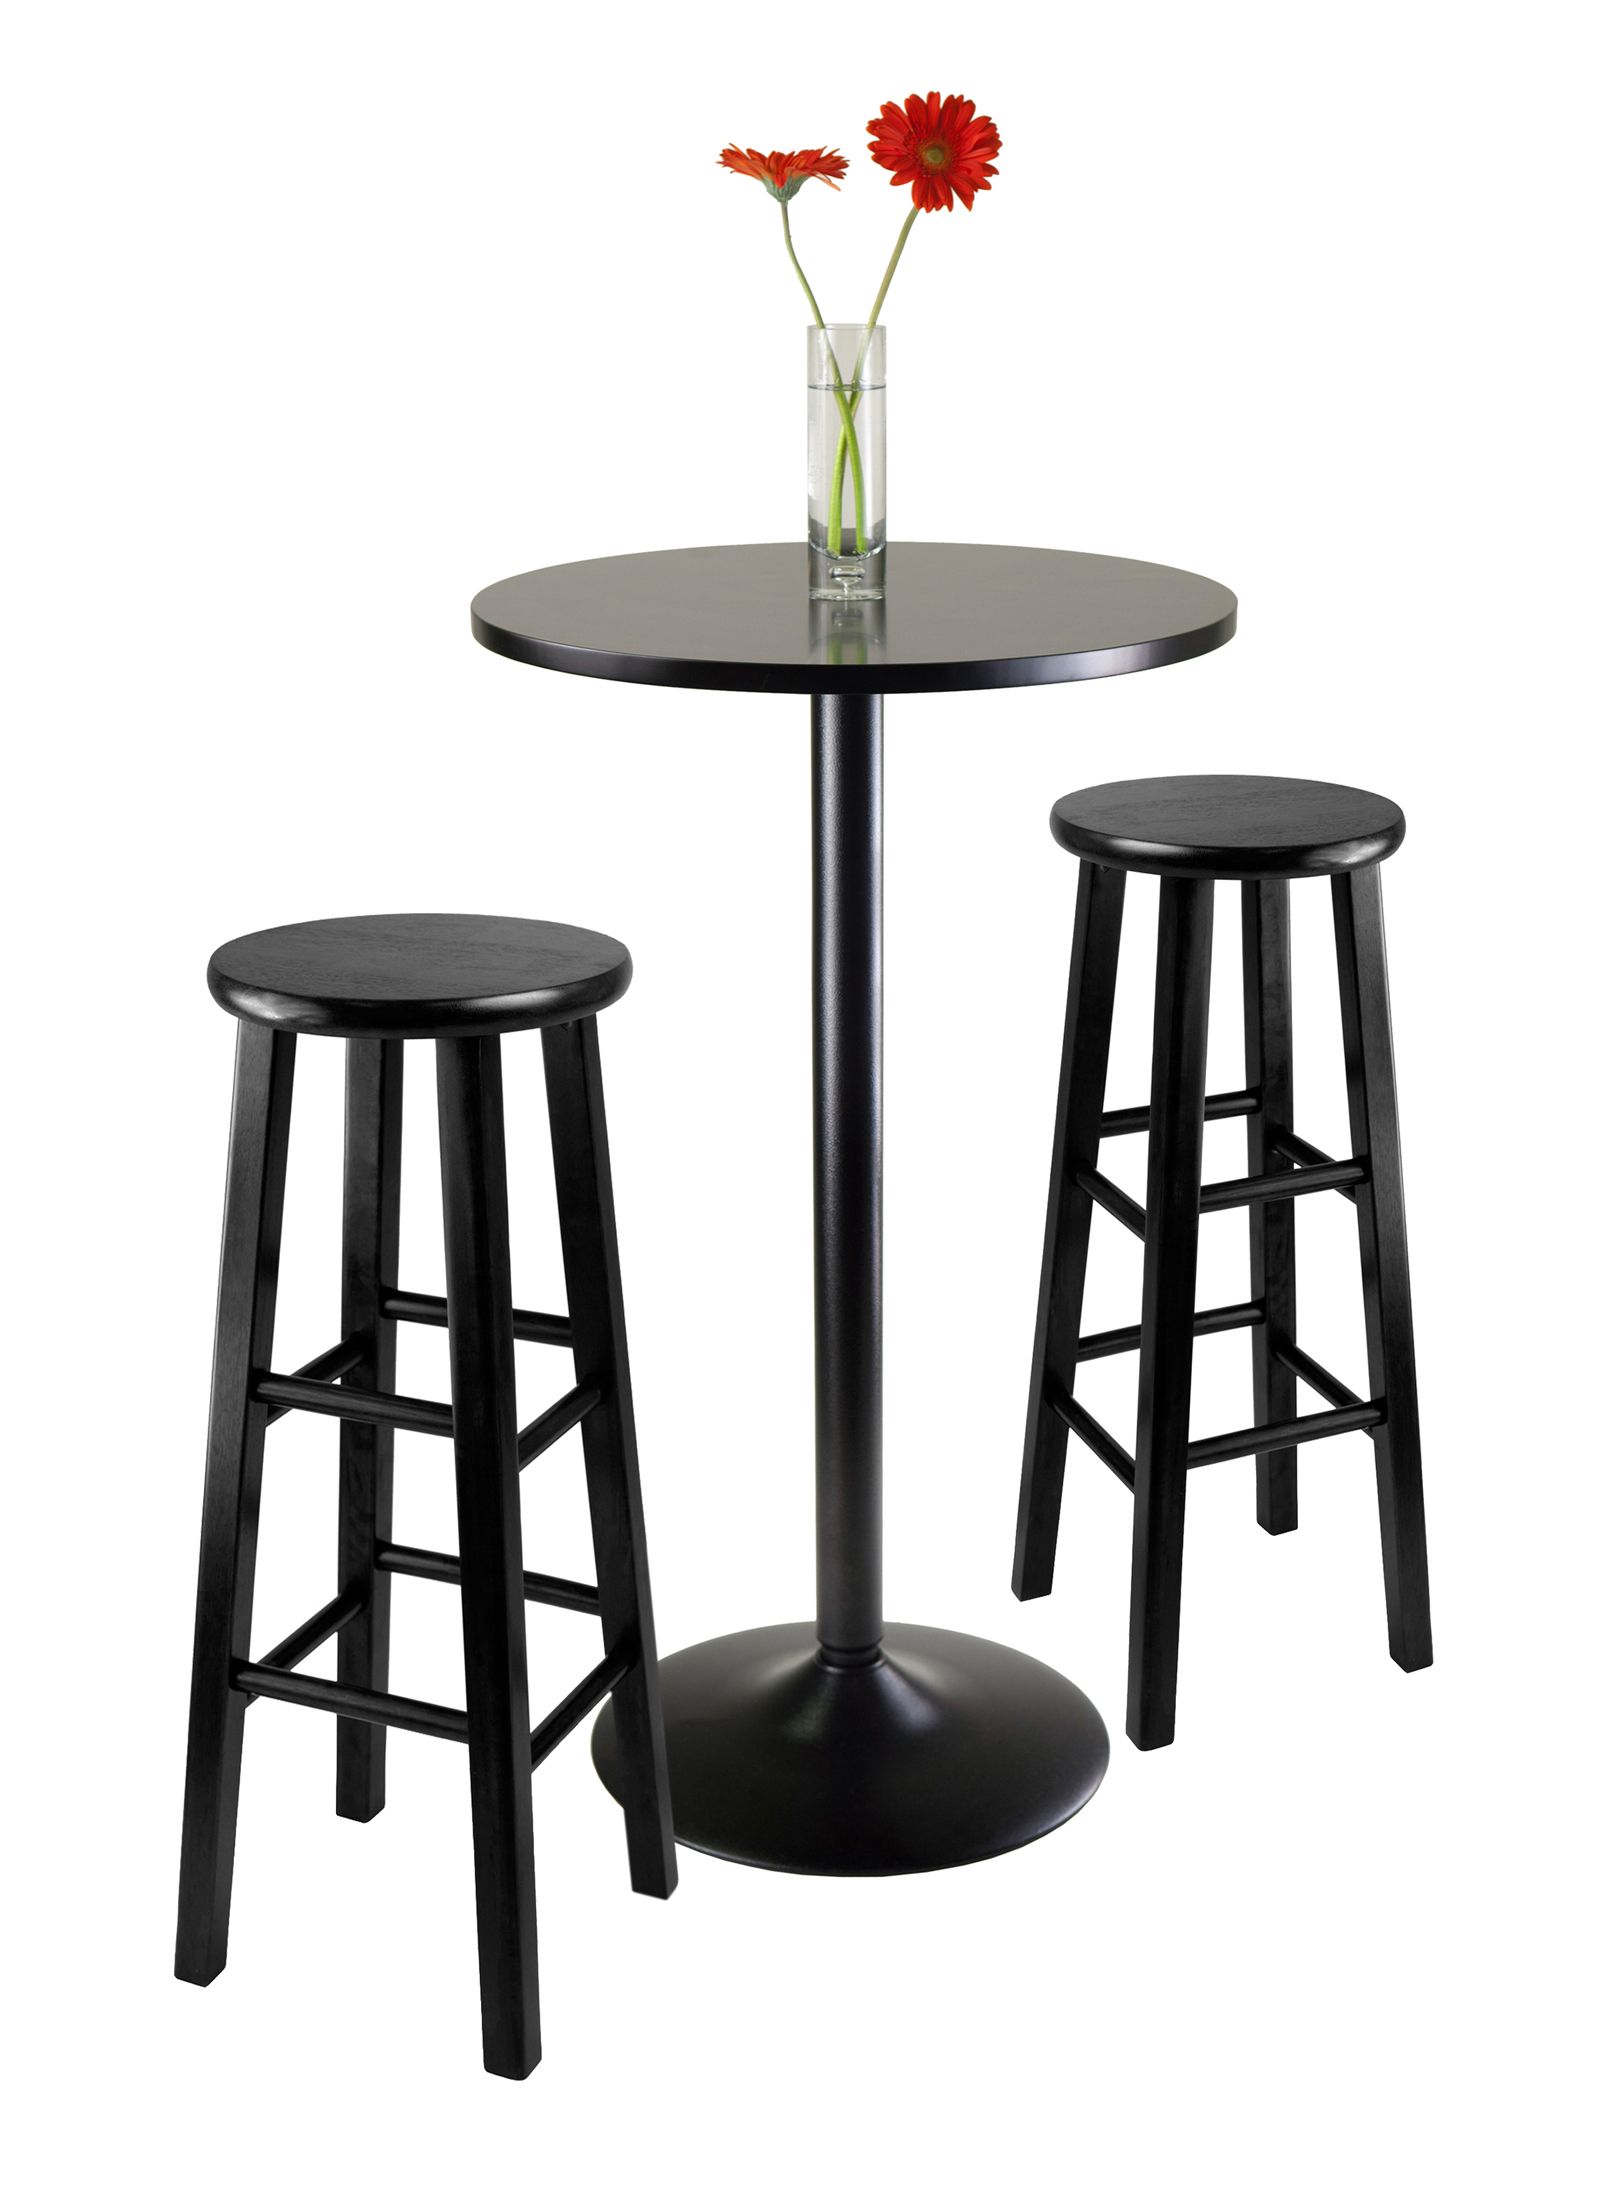 Preferred Winsome 3 Piece Counter Height Dining Sets Regarding Winsome Wood Obsidian 3 Piece Round Black Pub Table Set – $139.72 (Photo 12 of 20)